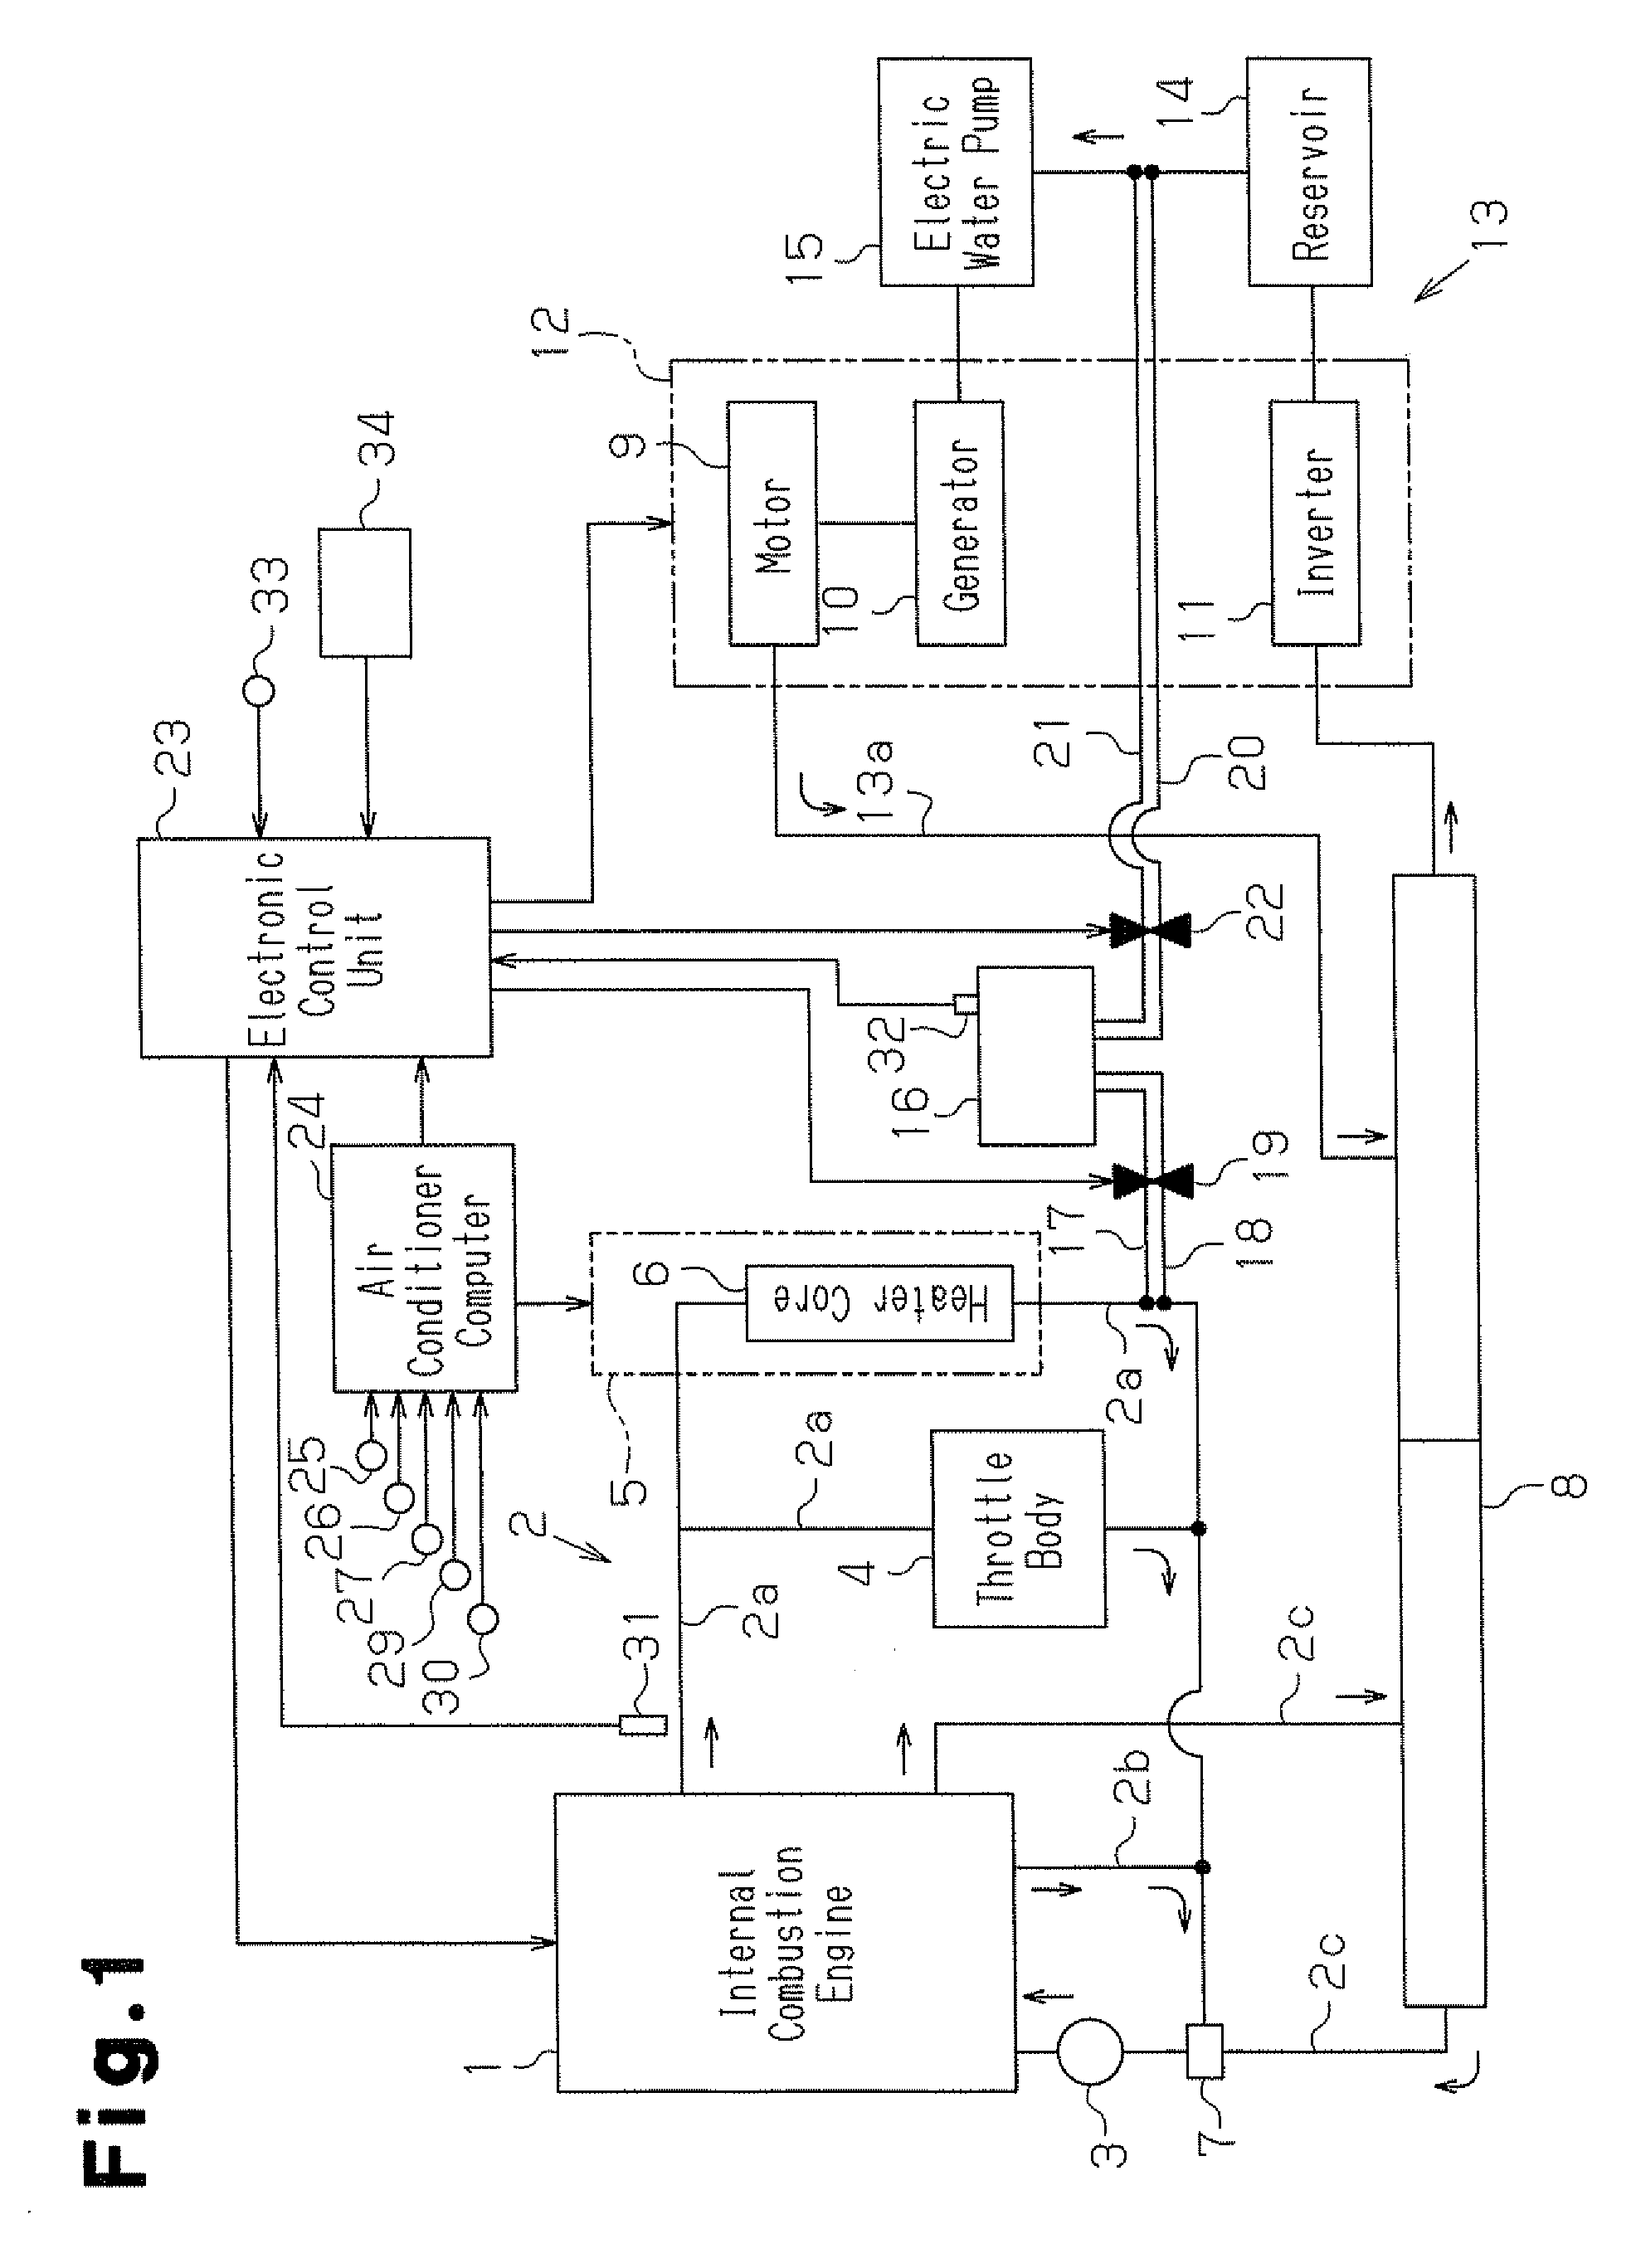 Device for controlling hybrid vehicle